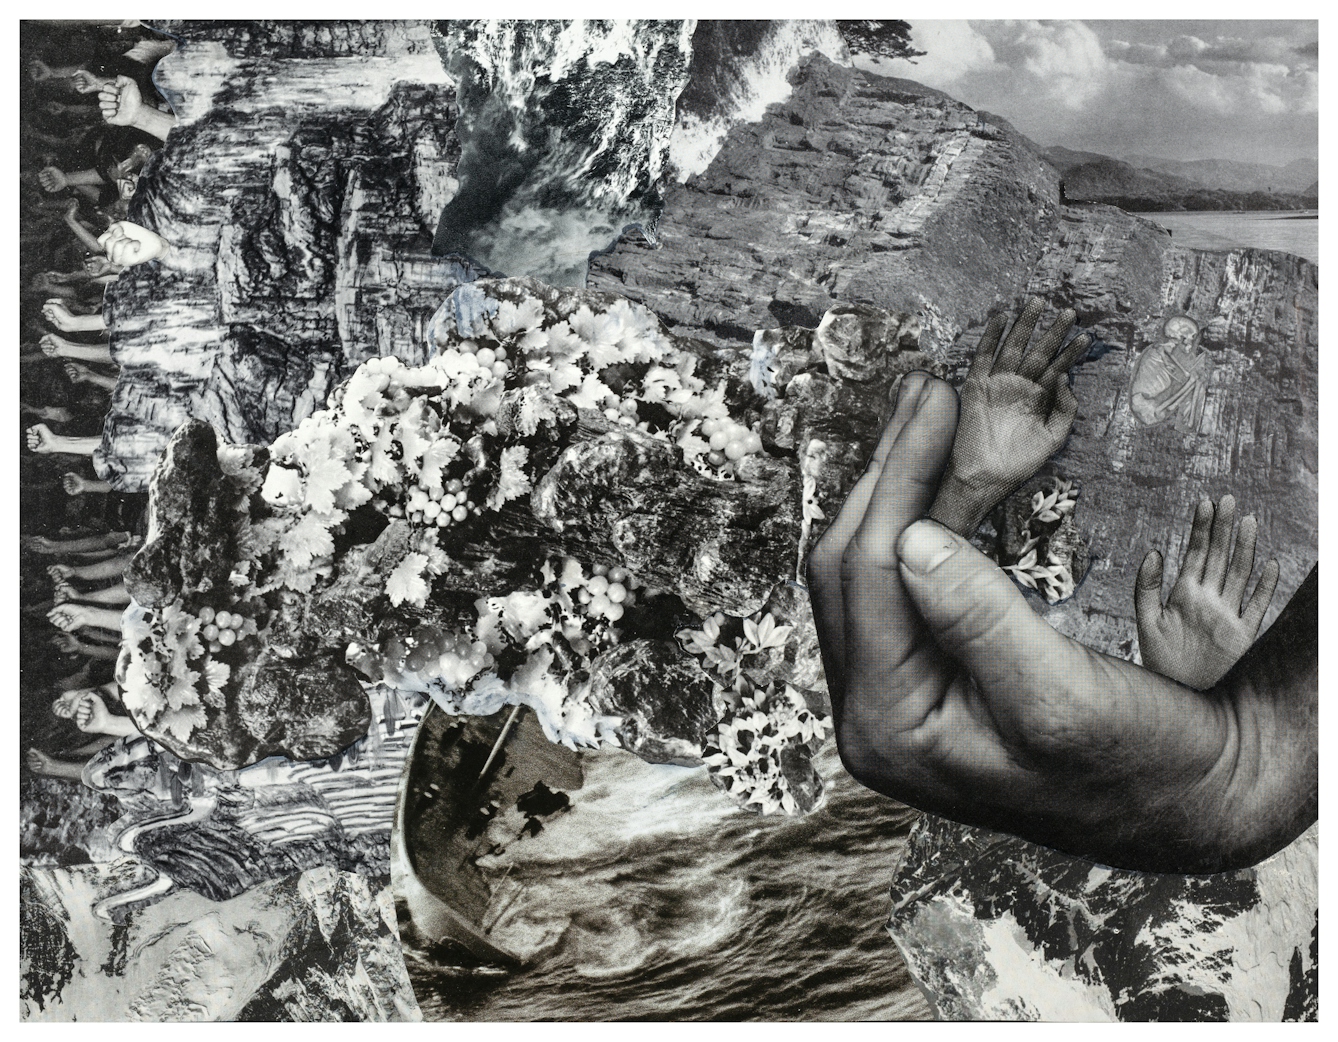 Photographic collage using images cut out from magazines and books. The scene depicts a complex and confusing image. To the left side, a sea of arms making fists all stick out horizontally. To the left side a large hand enters the image cradling two more hands which are held out as if asking for help. Behind these hands, against a cliff face a small skeleton can be seen in the foetal position. The centre of the frame contains fragments of fruit, rock faces, foliage and the bow of a ship ploughing through water. The overall tones of the collage are monotone, blacks, whites and greys.